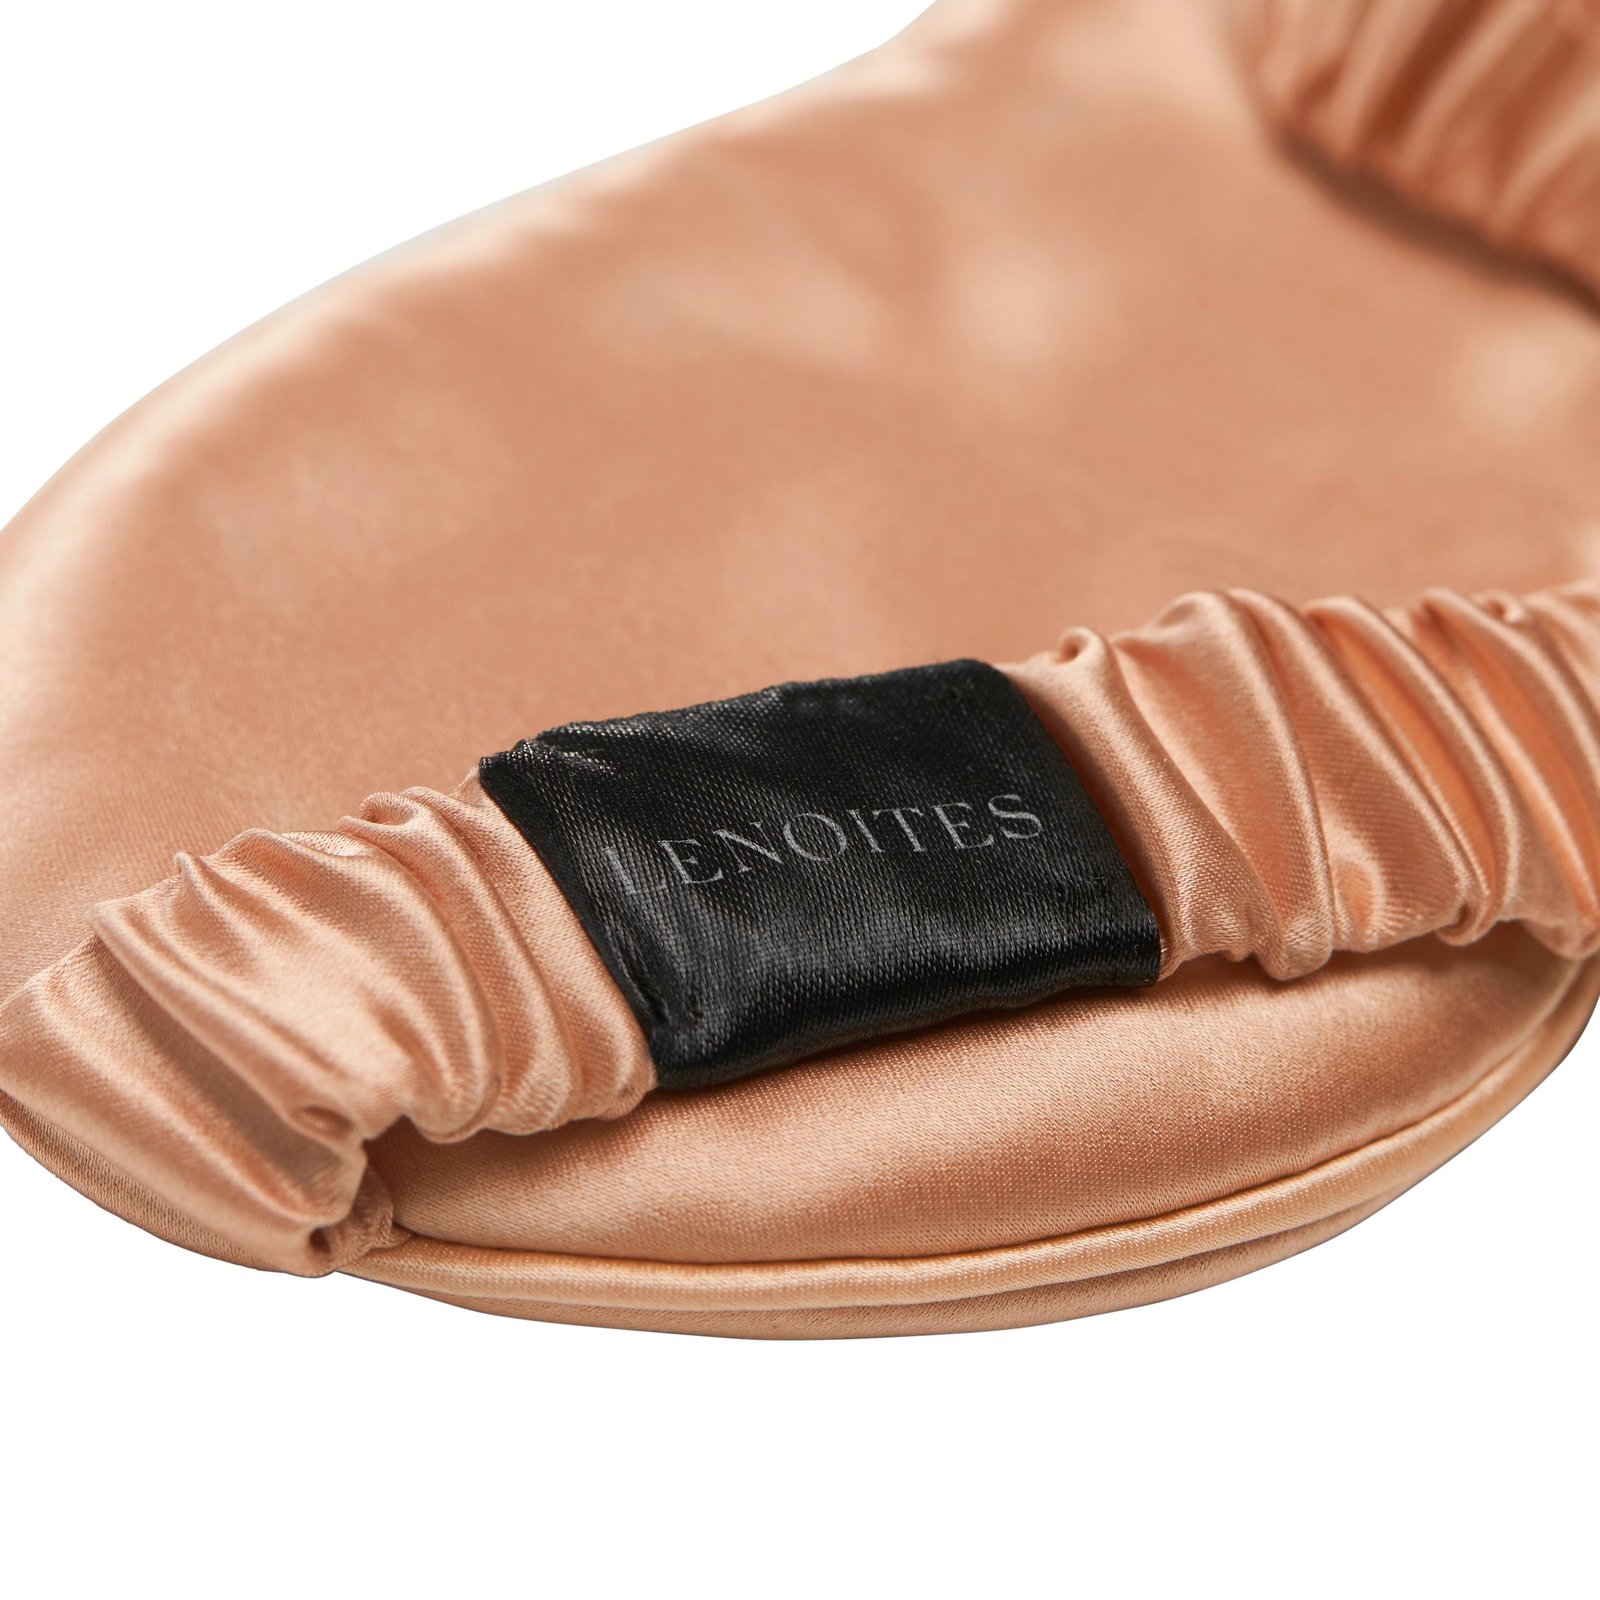 LENOITES Mulberry Sleep Mask & Pouch Rose Gold 1 st